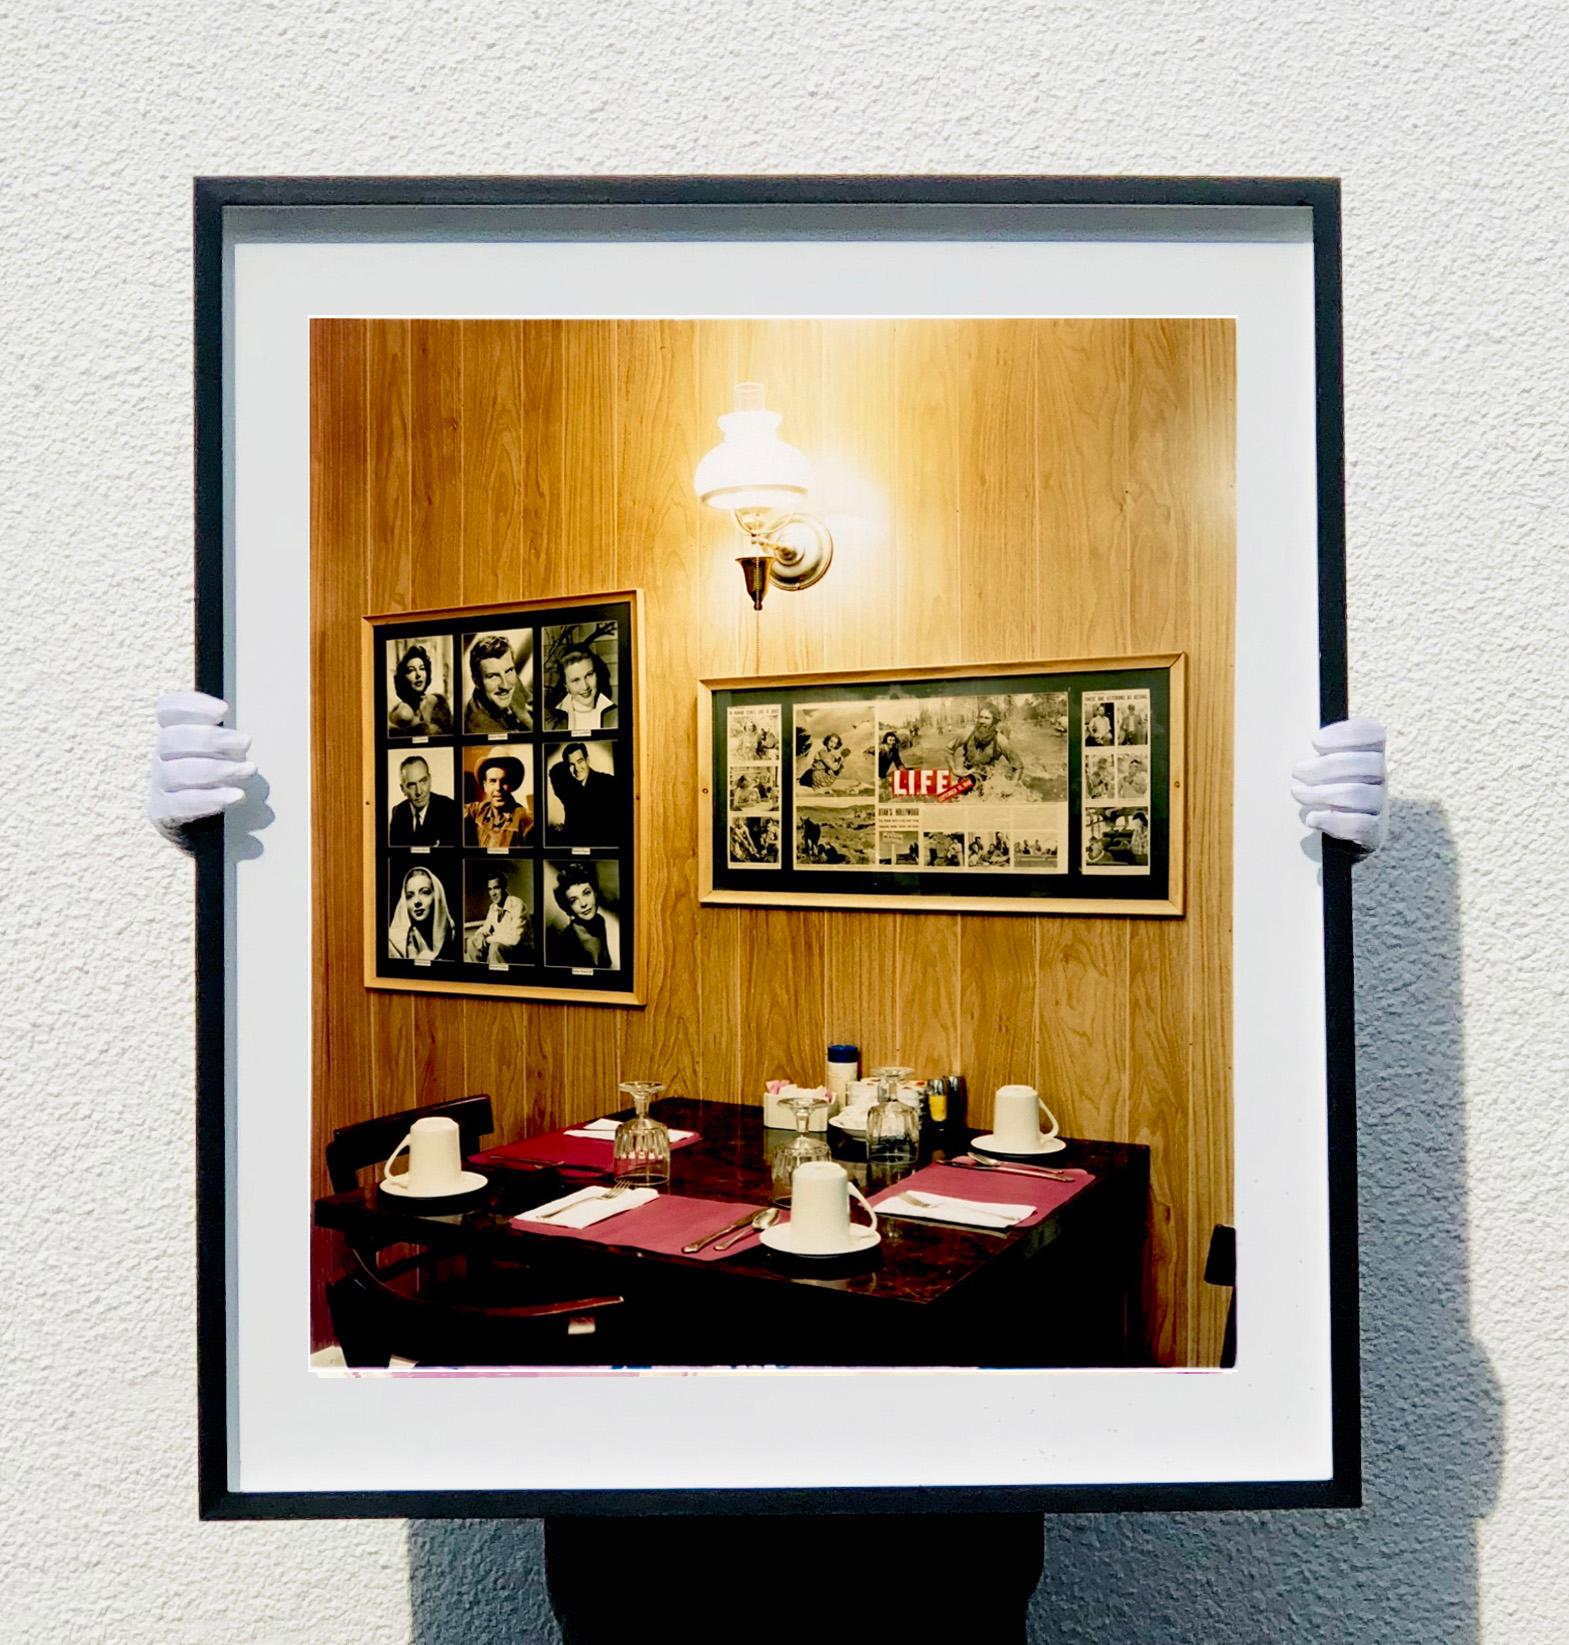 Dining Room, Kanab - Mid-century American interior color photography - Contemporary Print by Richard Heeps